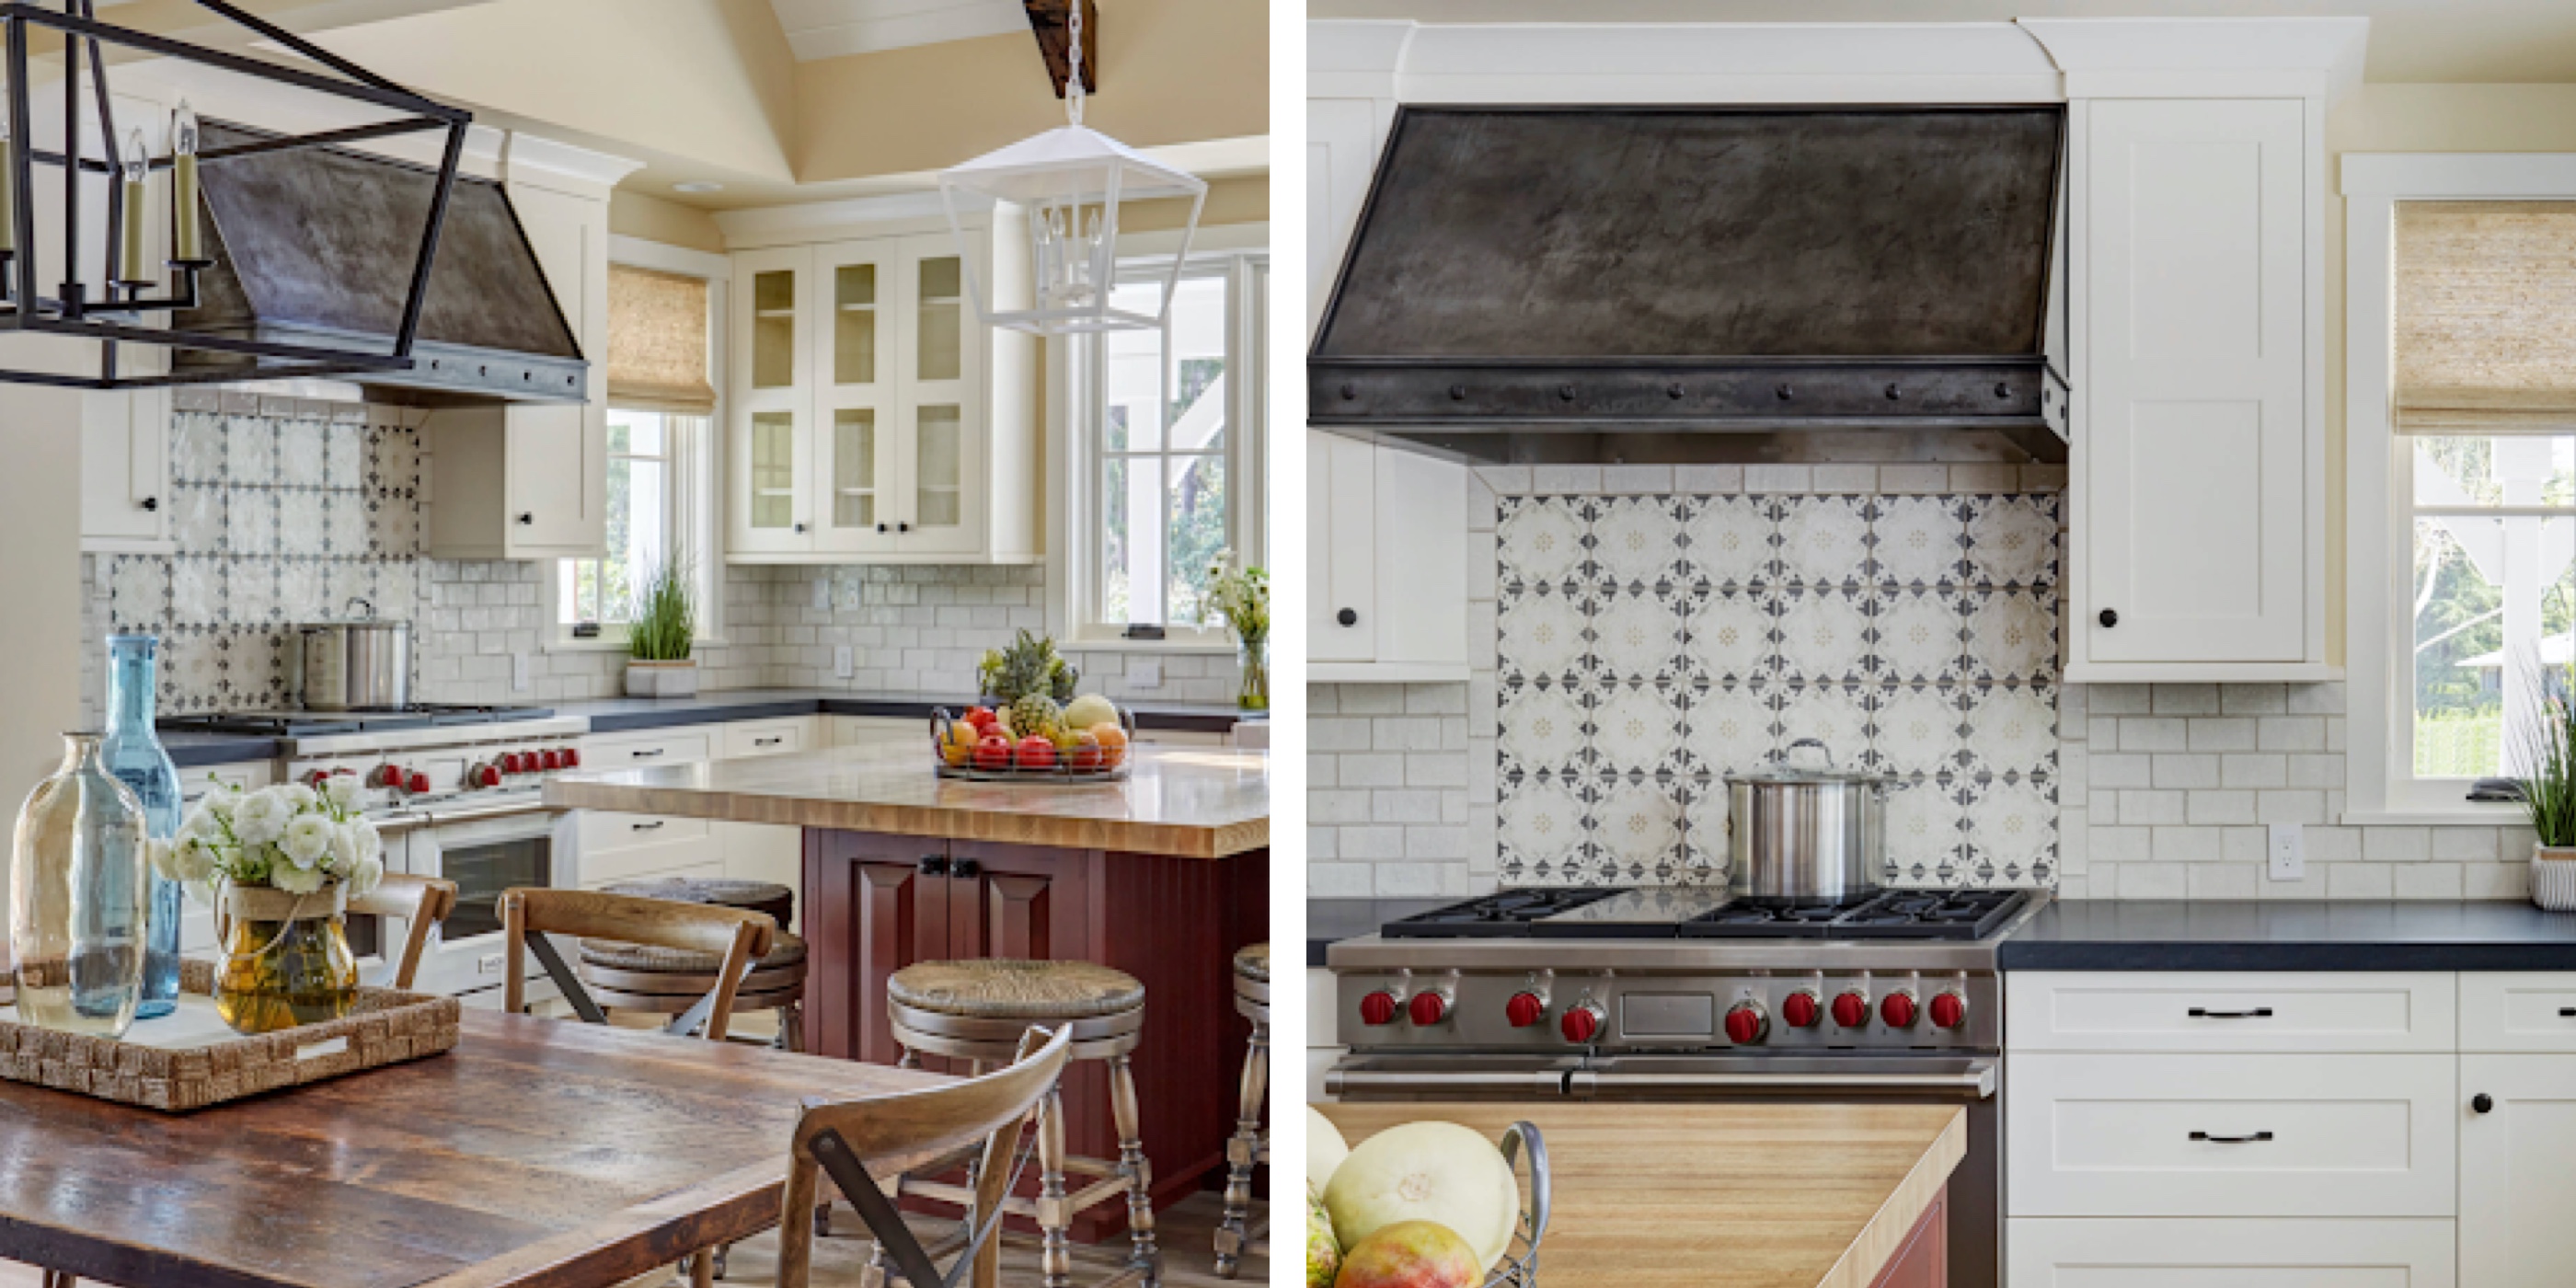 The Top High-End Backsplash Designs in the East Bay Area - Farmhouse Kitchen and Tile Design